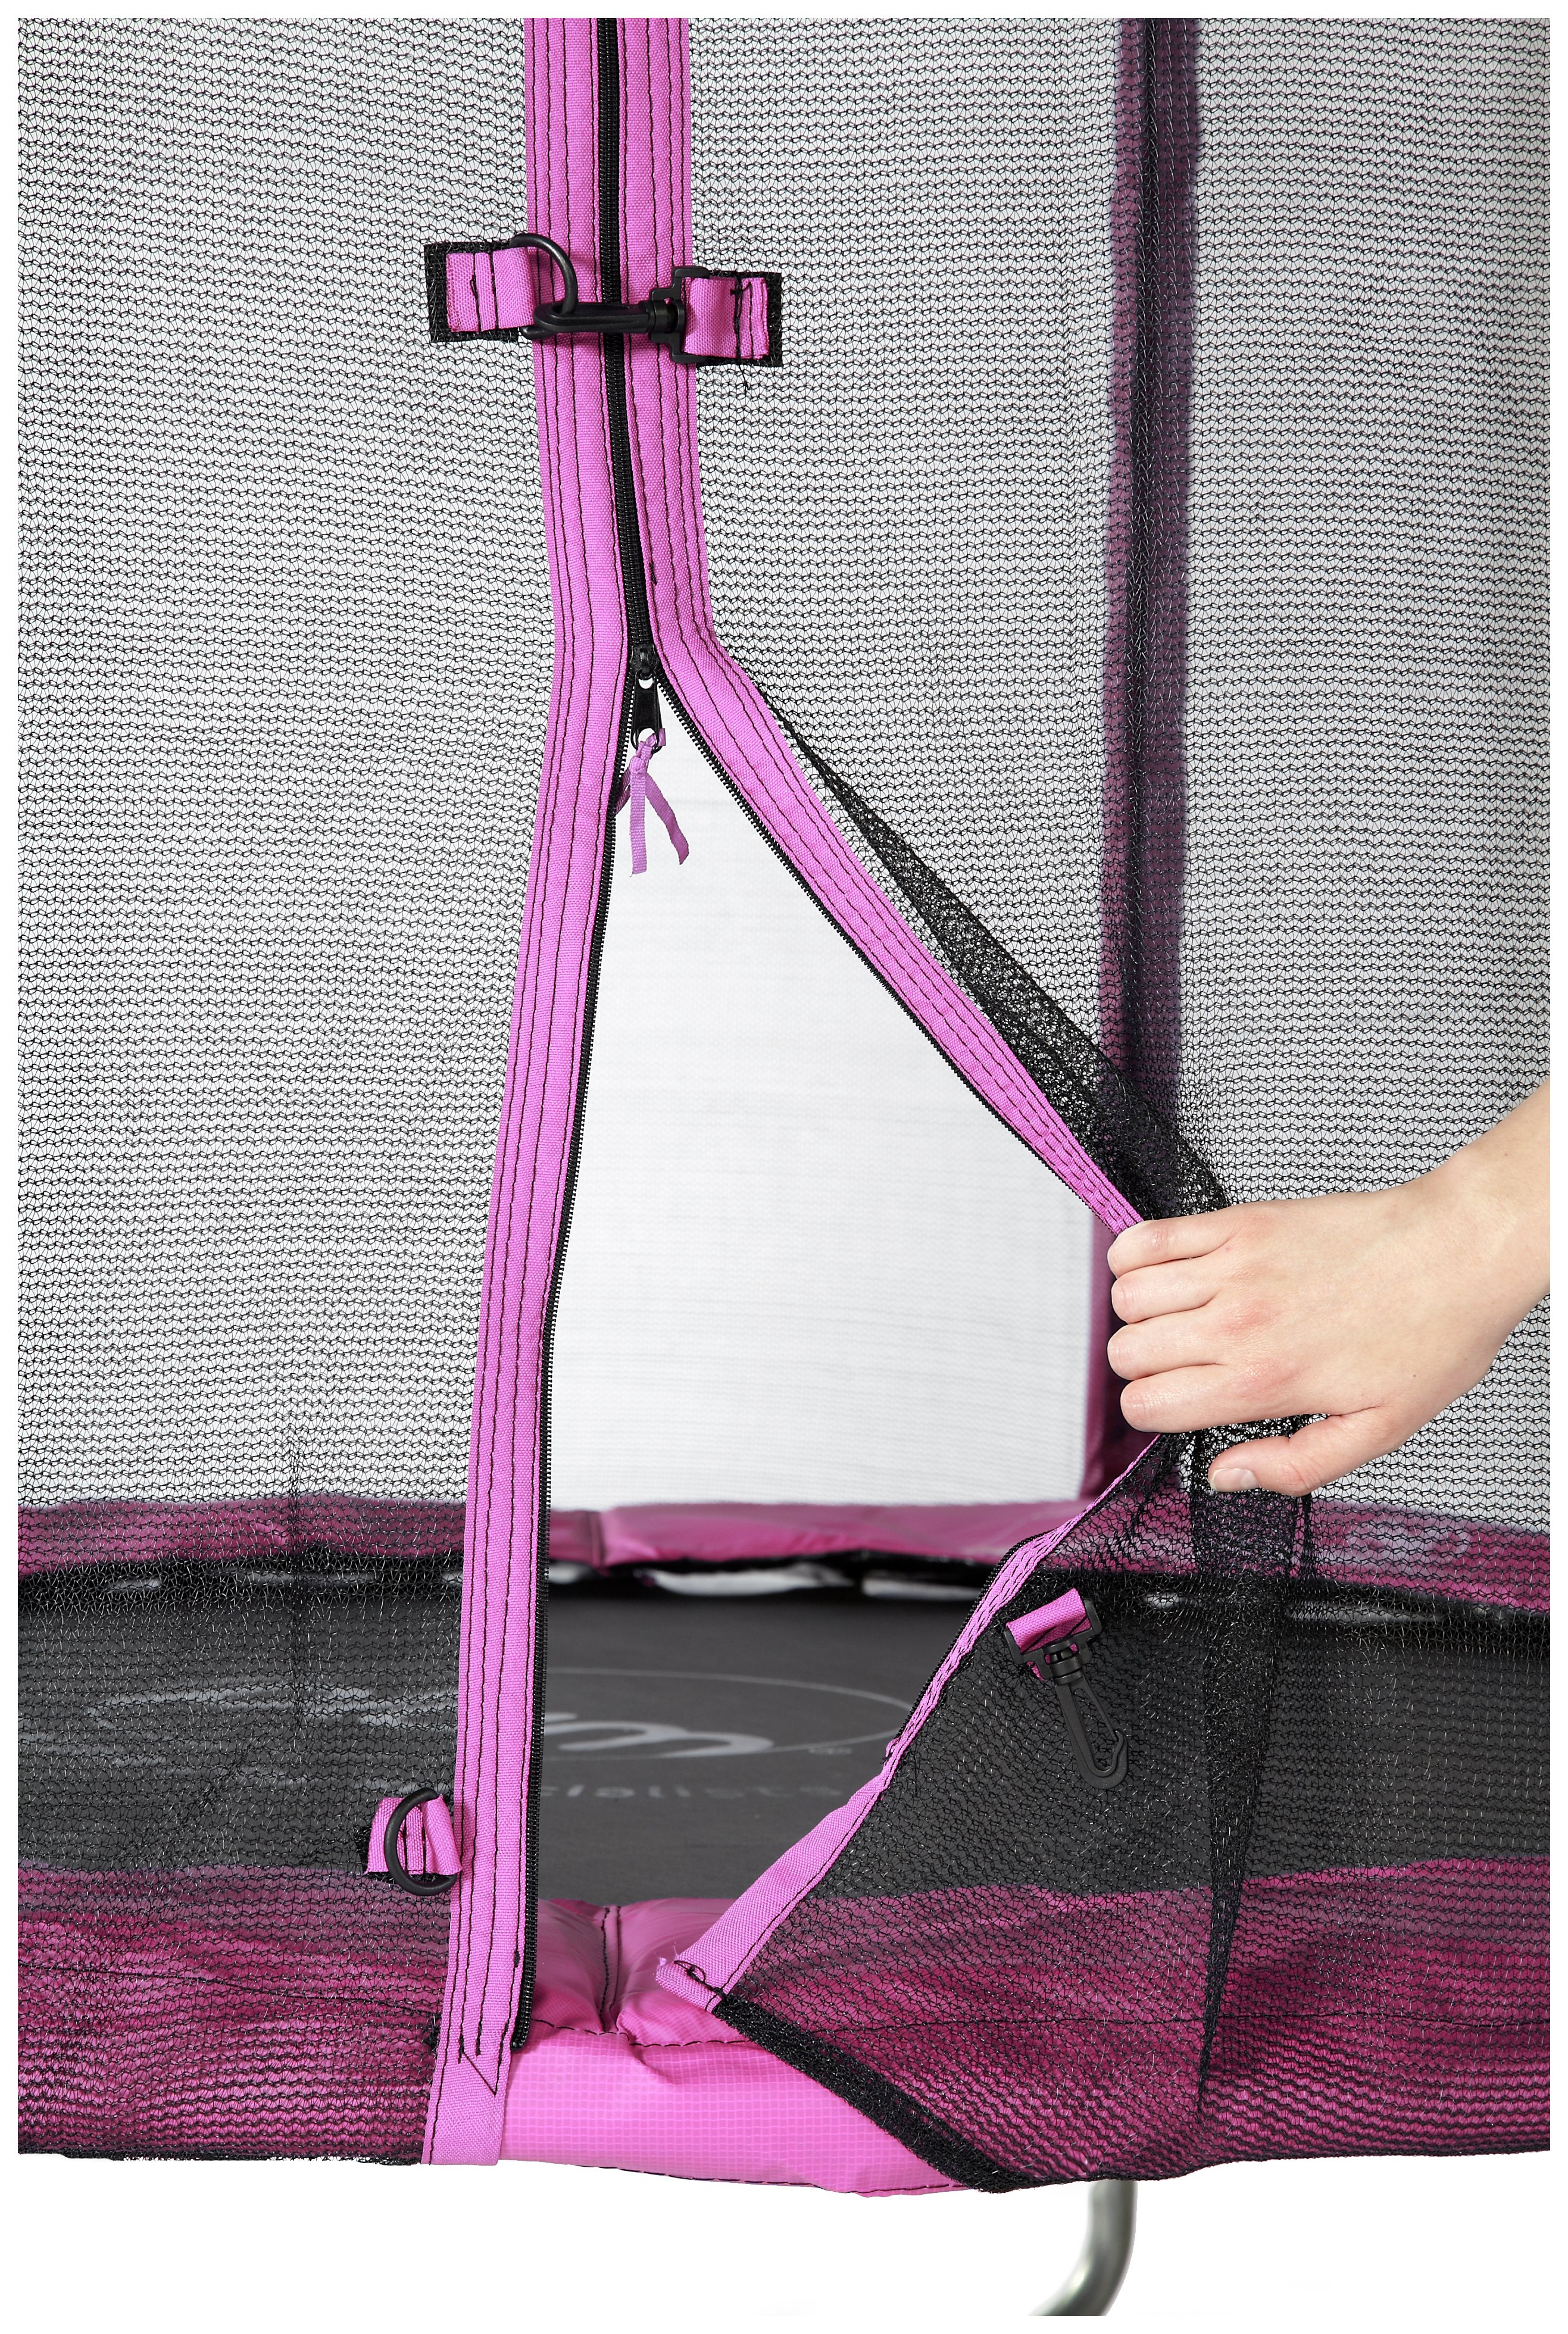 Plum 6ft Trampoline with Enclosure Pink Review